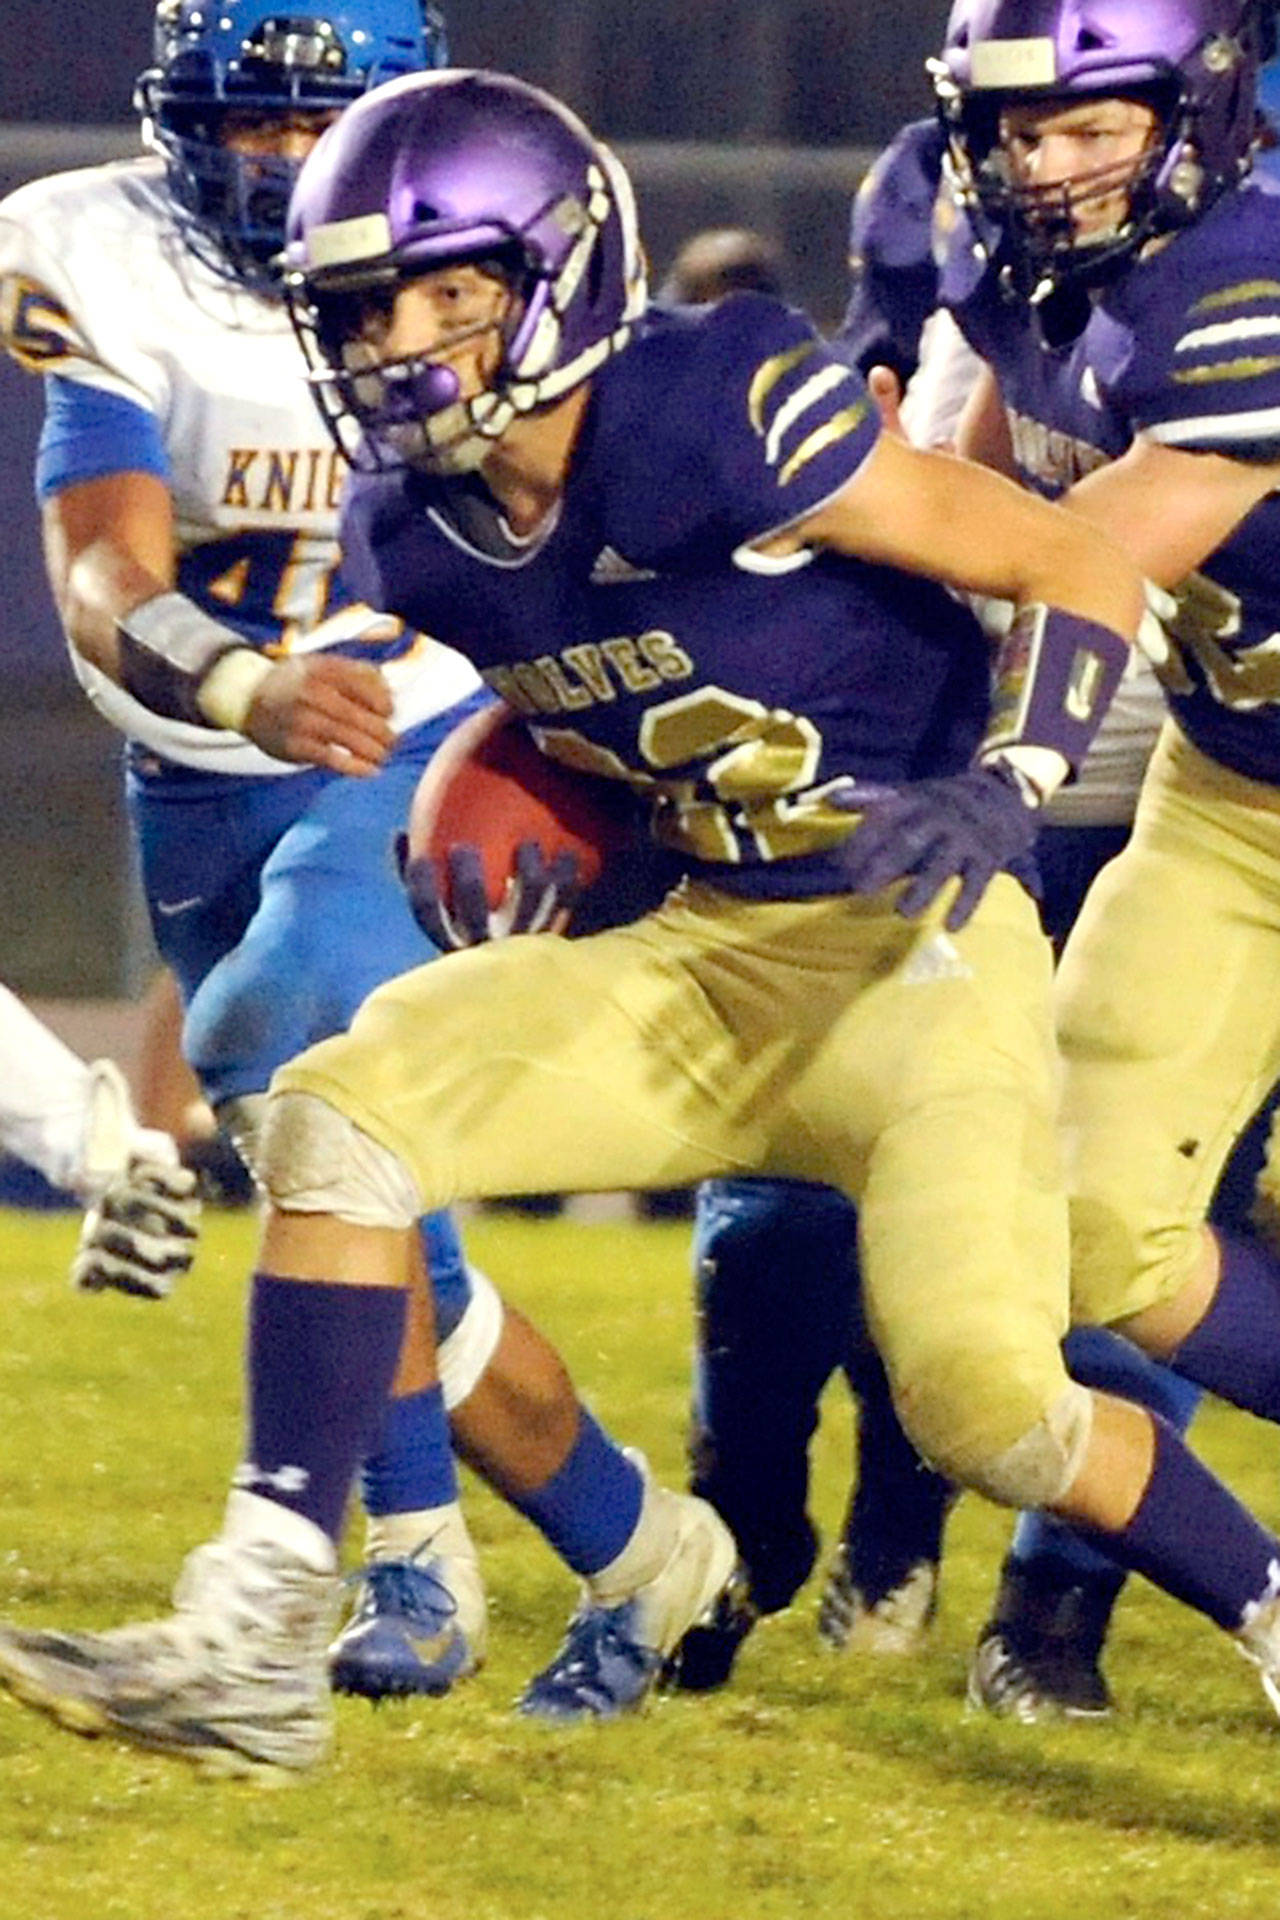 Conor Dowley/Olympic Peninsula News Group Walker Ward breaks through the line during the third quarter of the Sequim Wolves’ 36-21 win over the Bremerton Knights on Nov. 1. Ward was a reliable workhorse on the night, with 122 yards on 24 carries, and picking up several big first downs to keep drives moving.